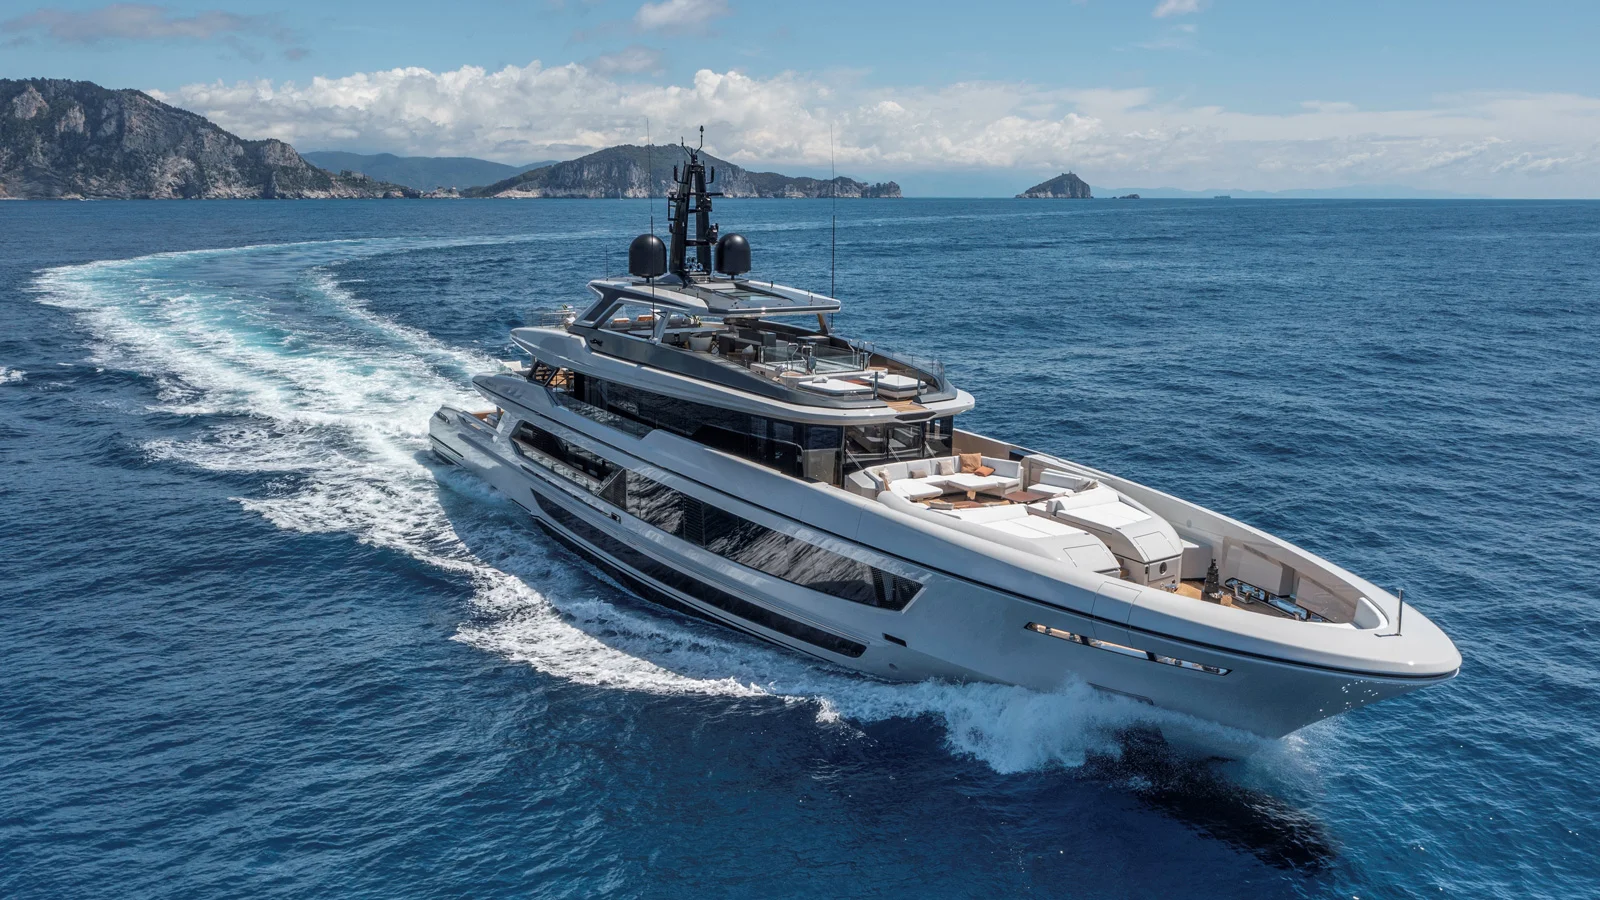 The Baglietto T52 yacht is scheduled for delivery in 2026